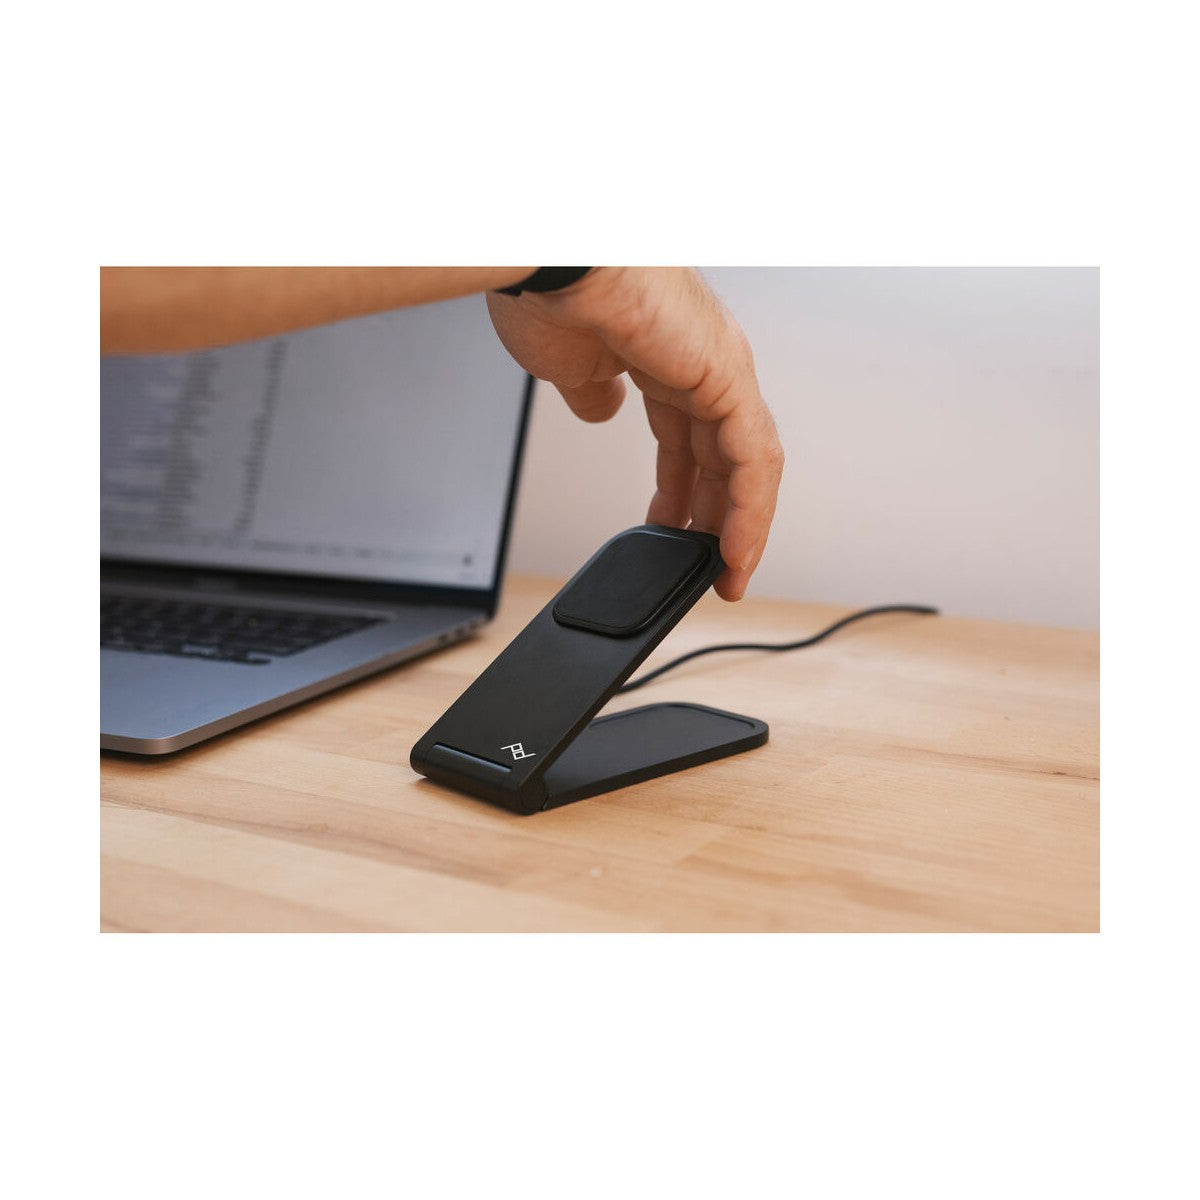 Peak Design Mobile Magnetic Wireless Smartphone Charging Stand